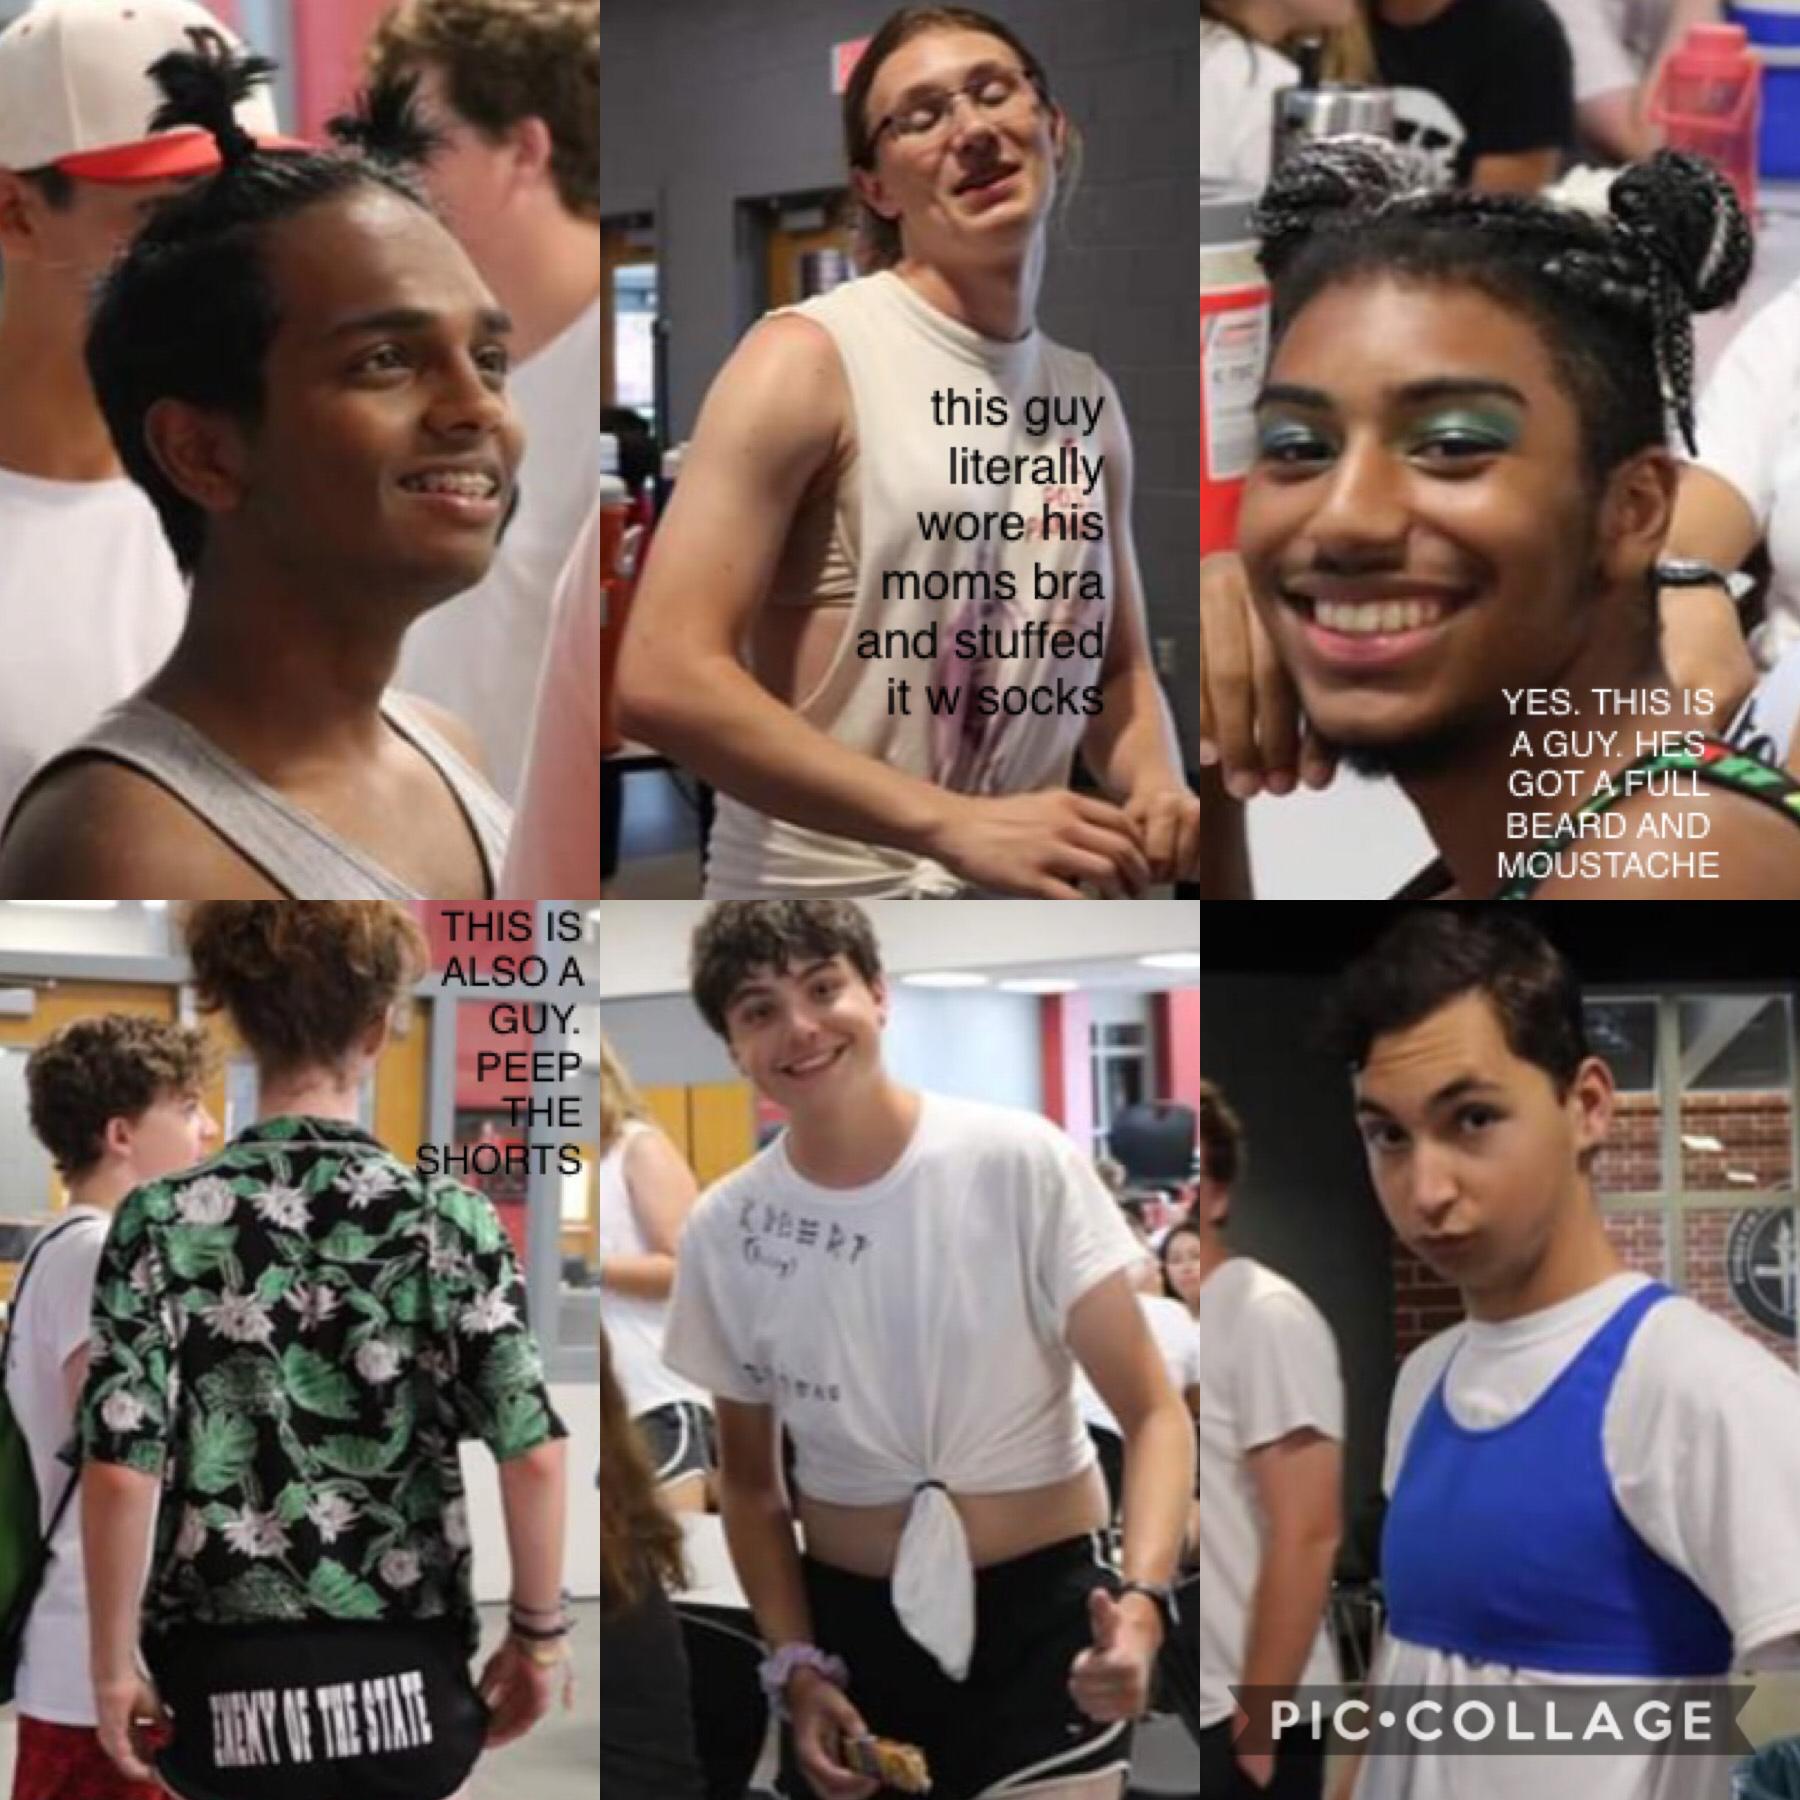 so today at band camp was good old gender swap day and i saw WAY MORE THAN I WANTED TO. literally ever guy lined up this morning and all got eyeshadow, eyeliner, and blush. they all tied th ōt knots on their shirts too. some girls participated but the guy